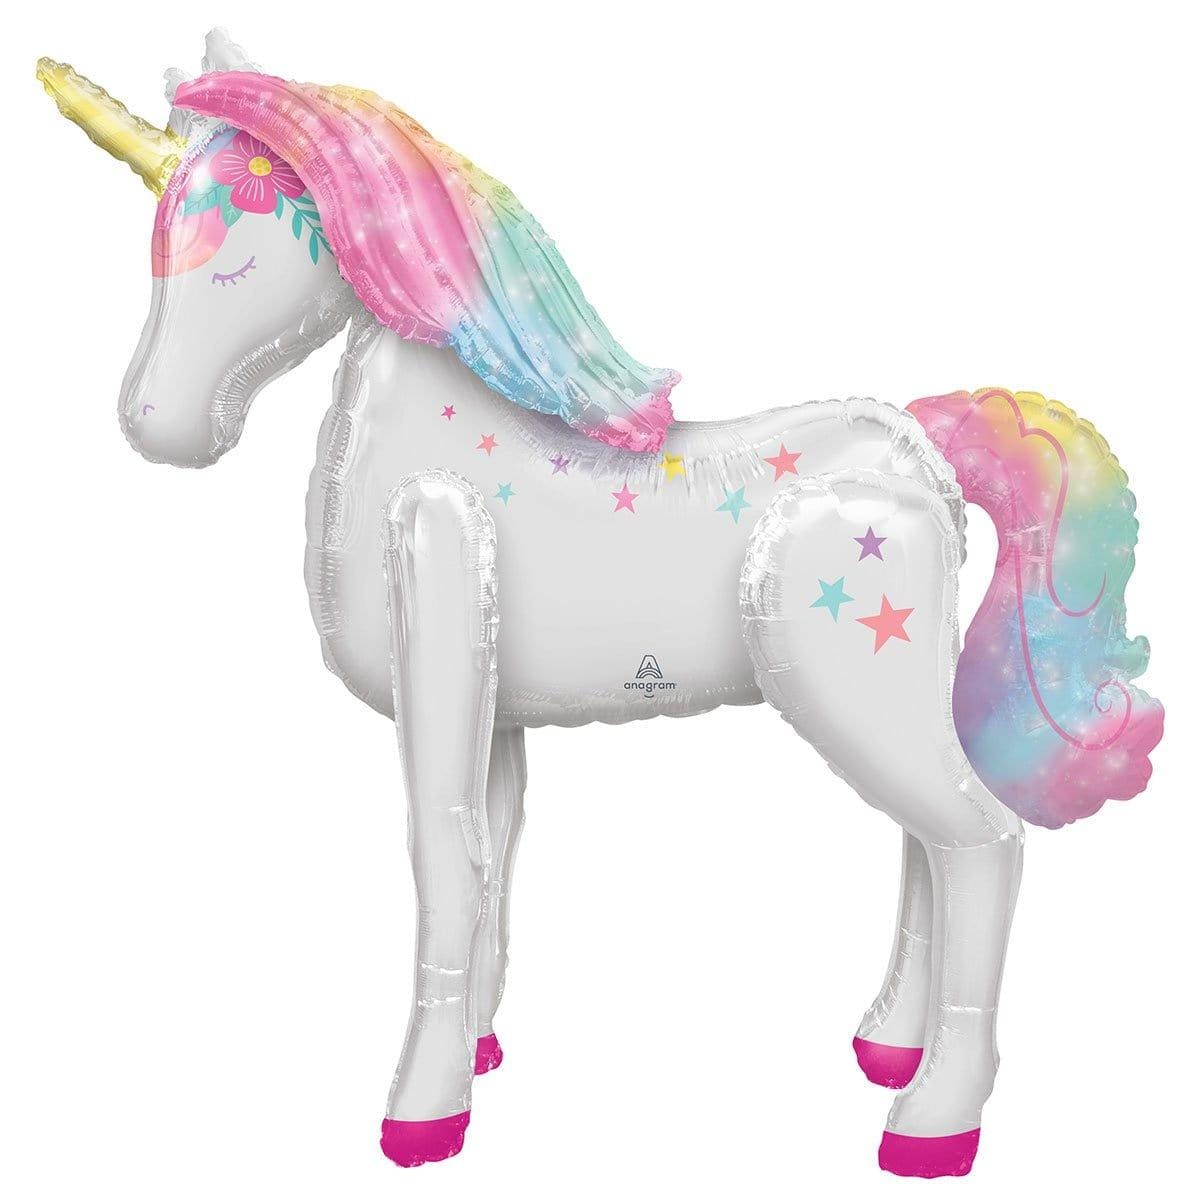 Buy Balloons Giant Unicorn Air Walker Balloon sold at Party Expert